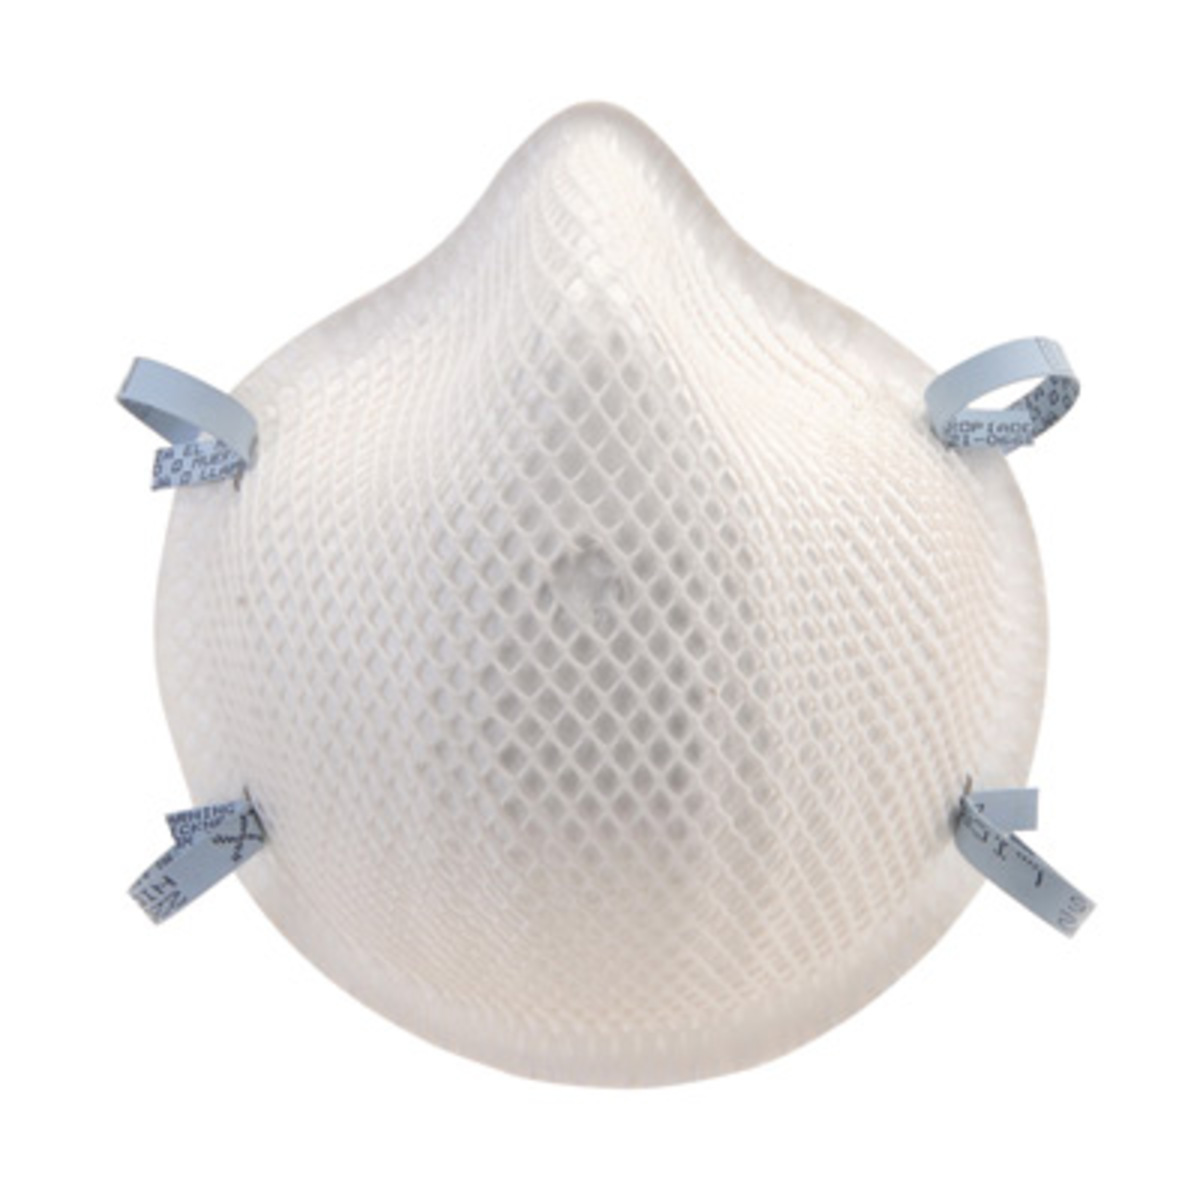 Moldex® Medium/Large N95 Disposable Particulate Respirator (Availability restrictions apply.)